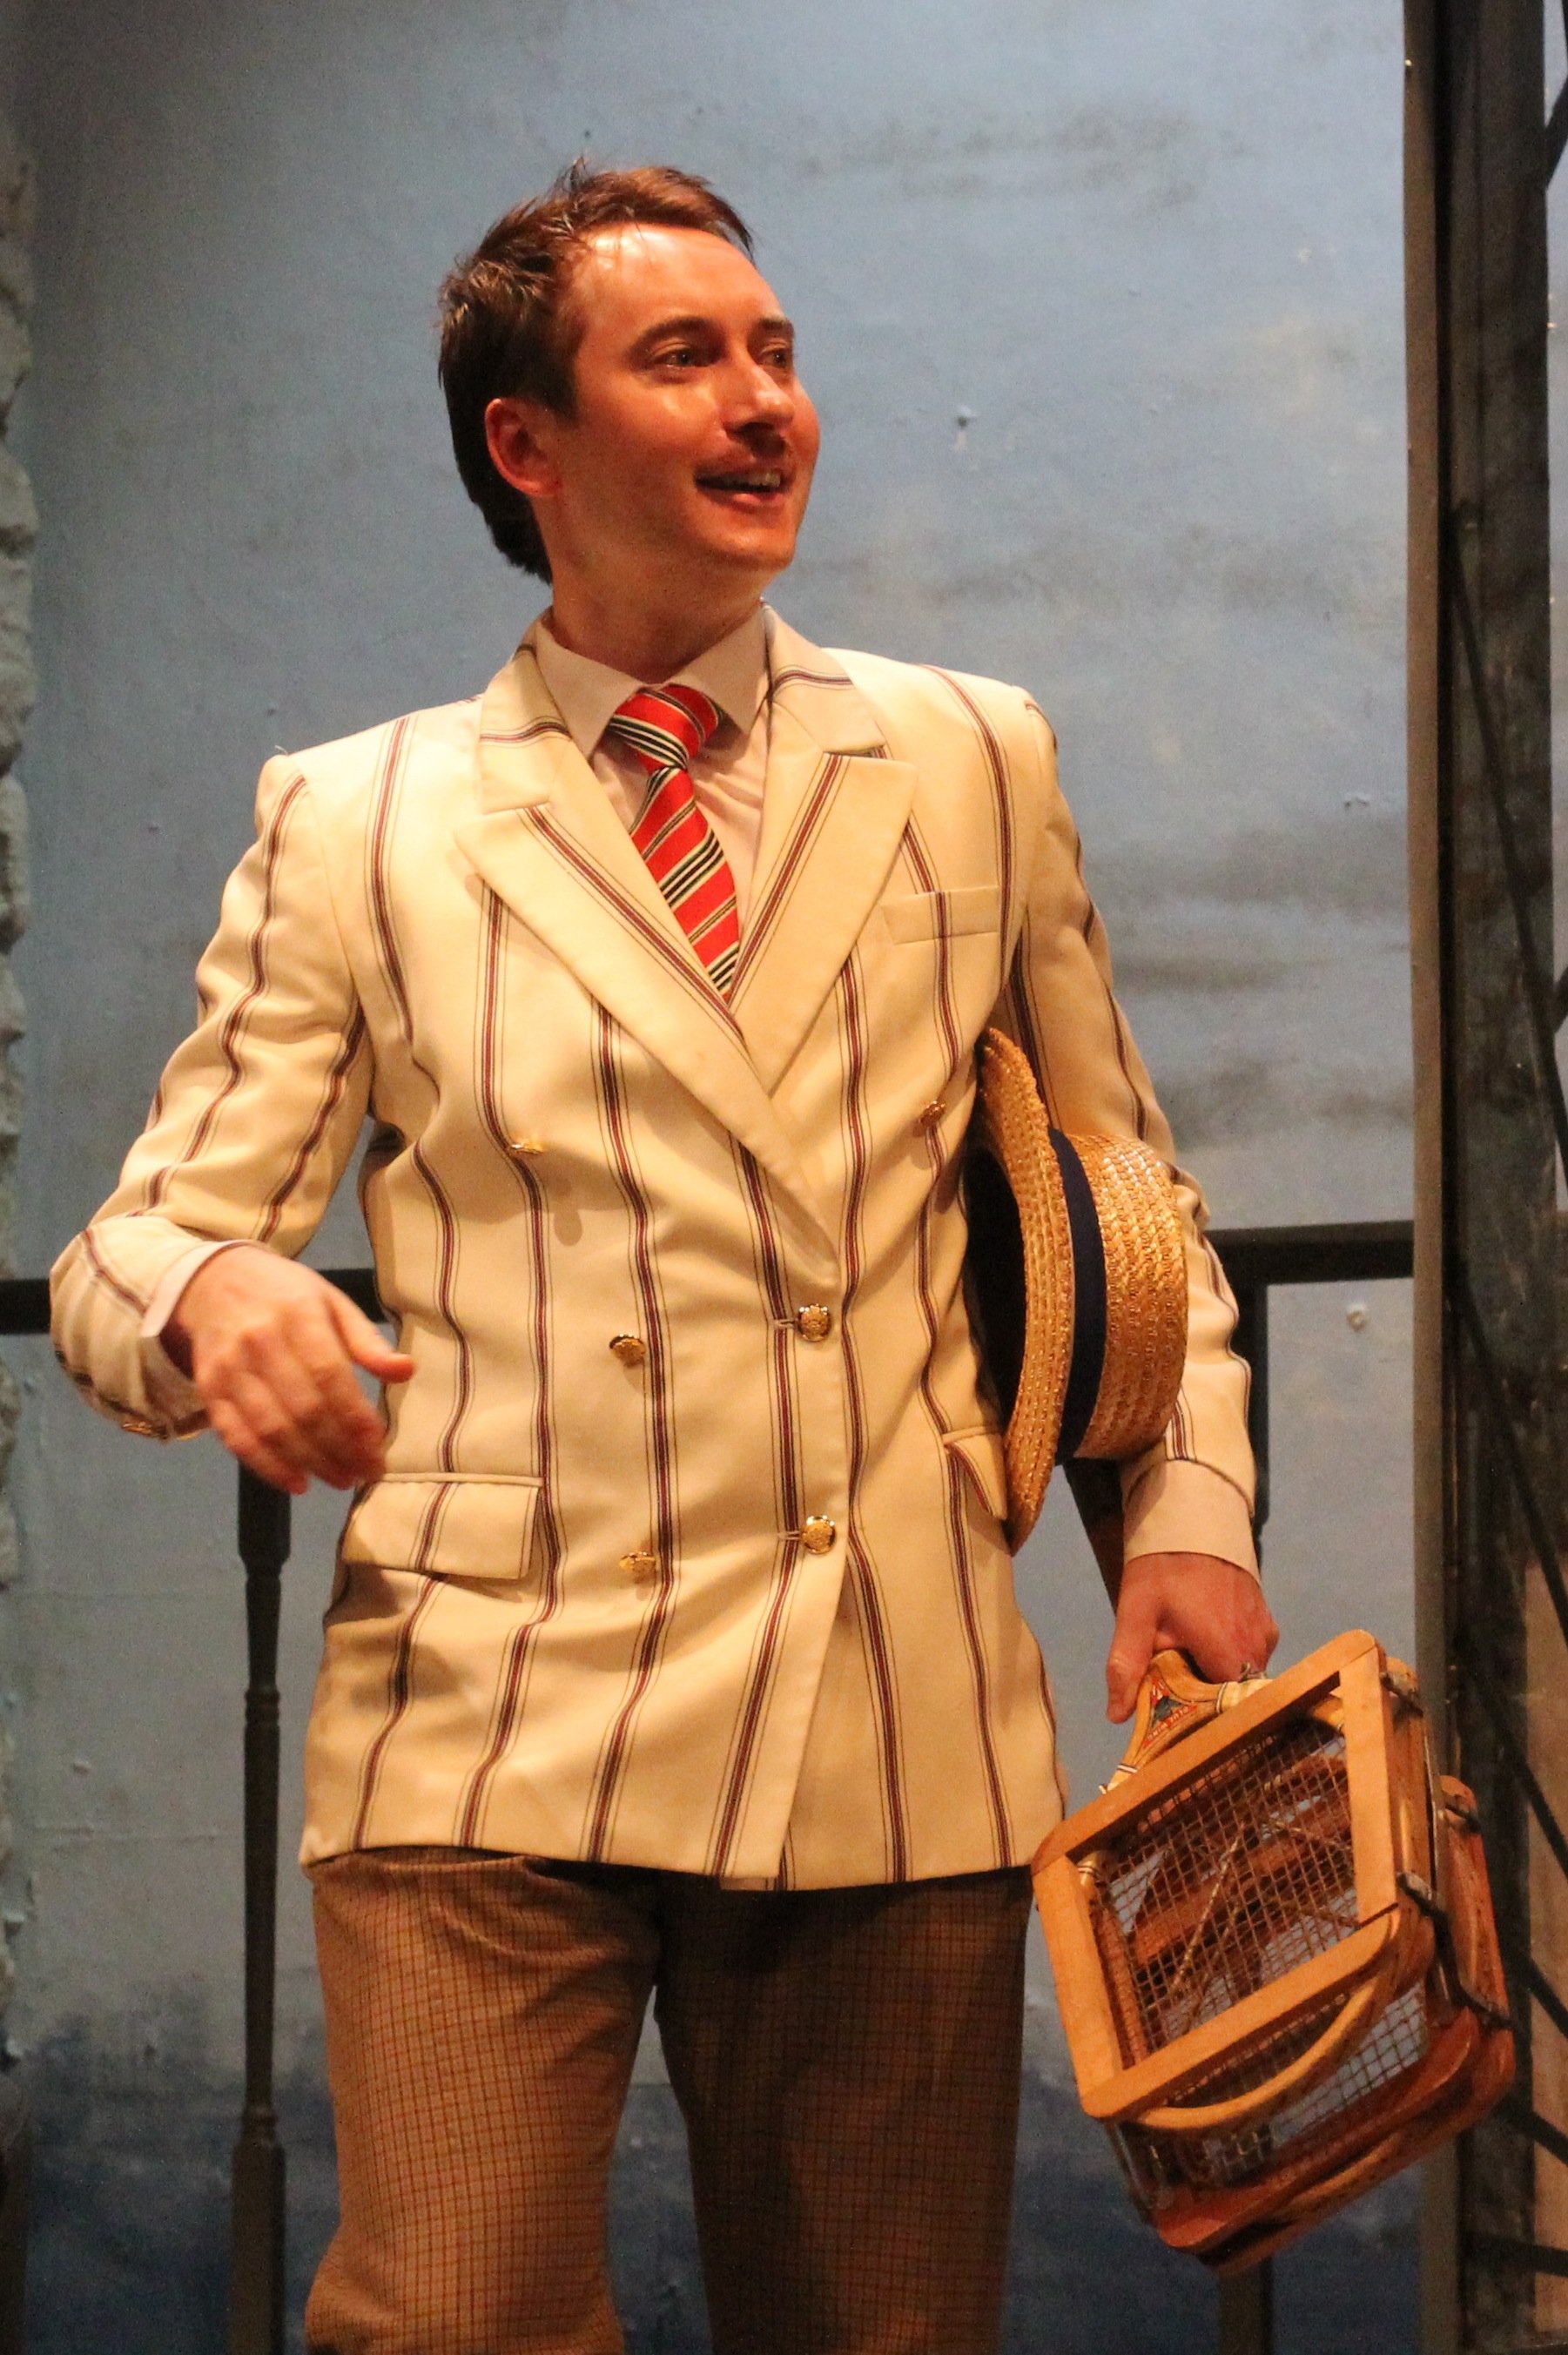 Luke Howard as Anthony Marston in the Agatha Christie stage play 'And Then There Were None' at The Dunstable Rep 2012